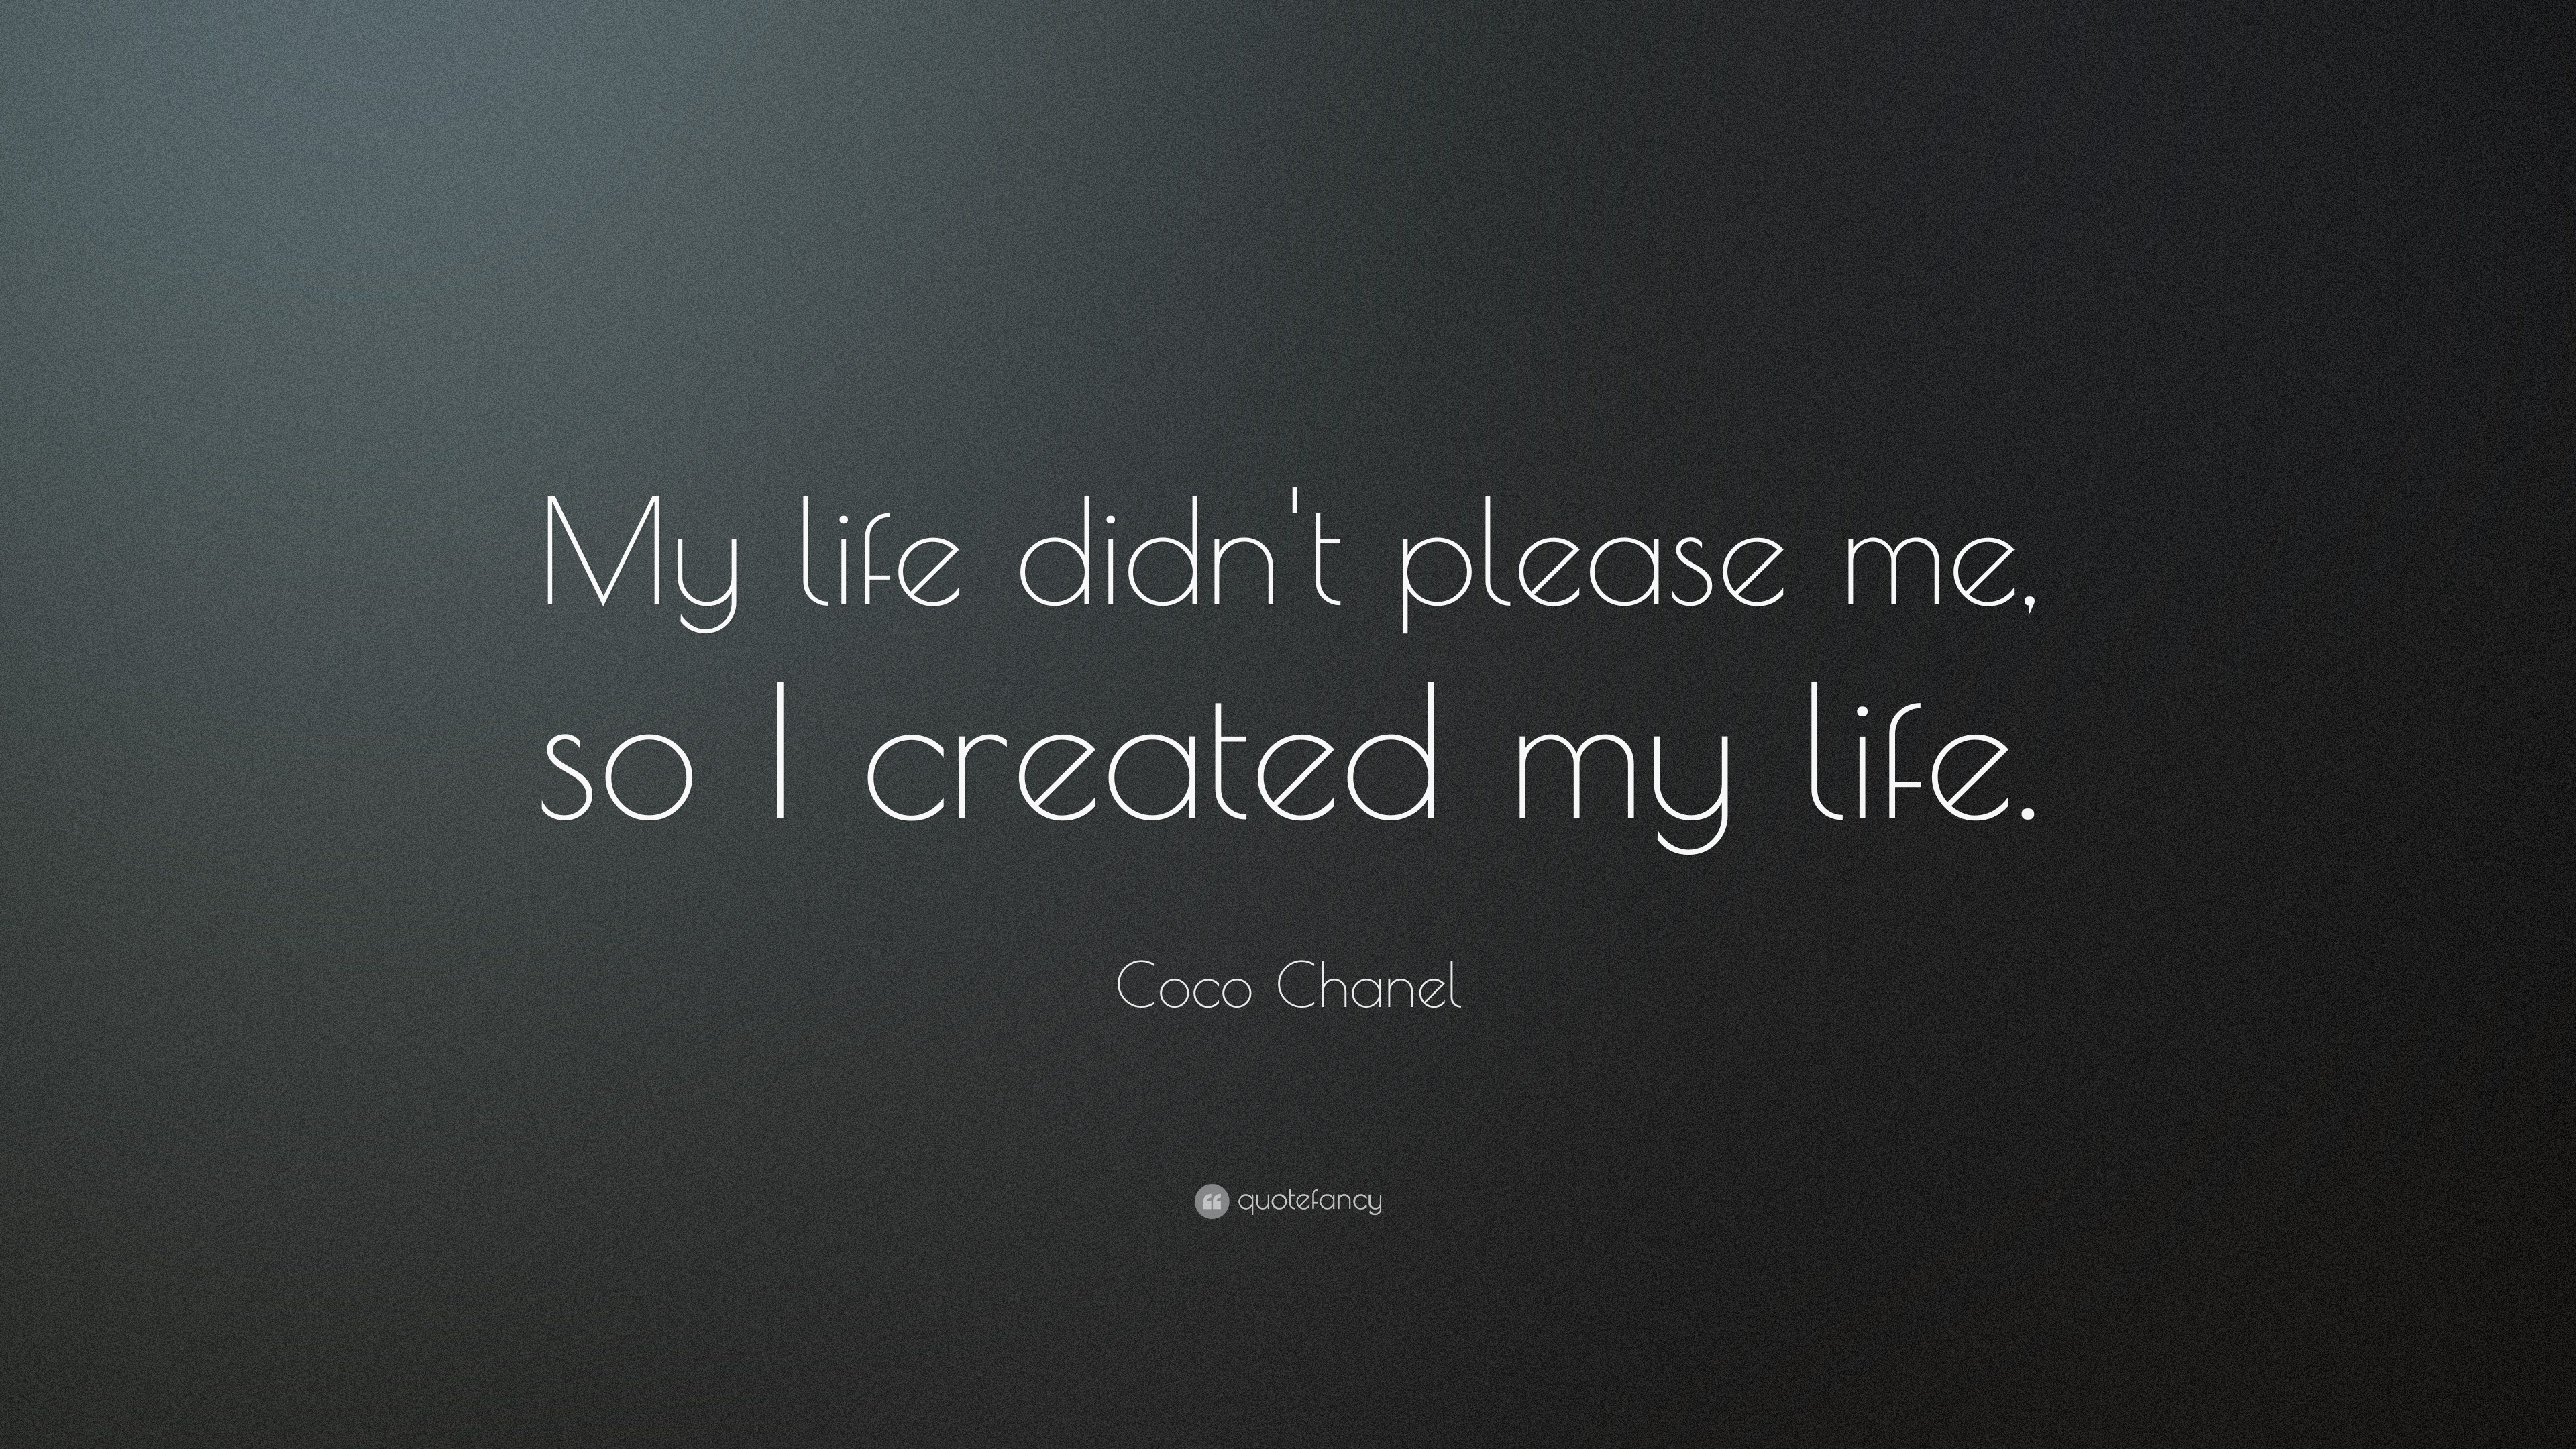 Coco Chanel Quotes (22 wallpapers) - Quotefancy